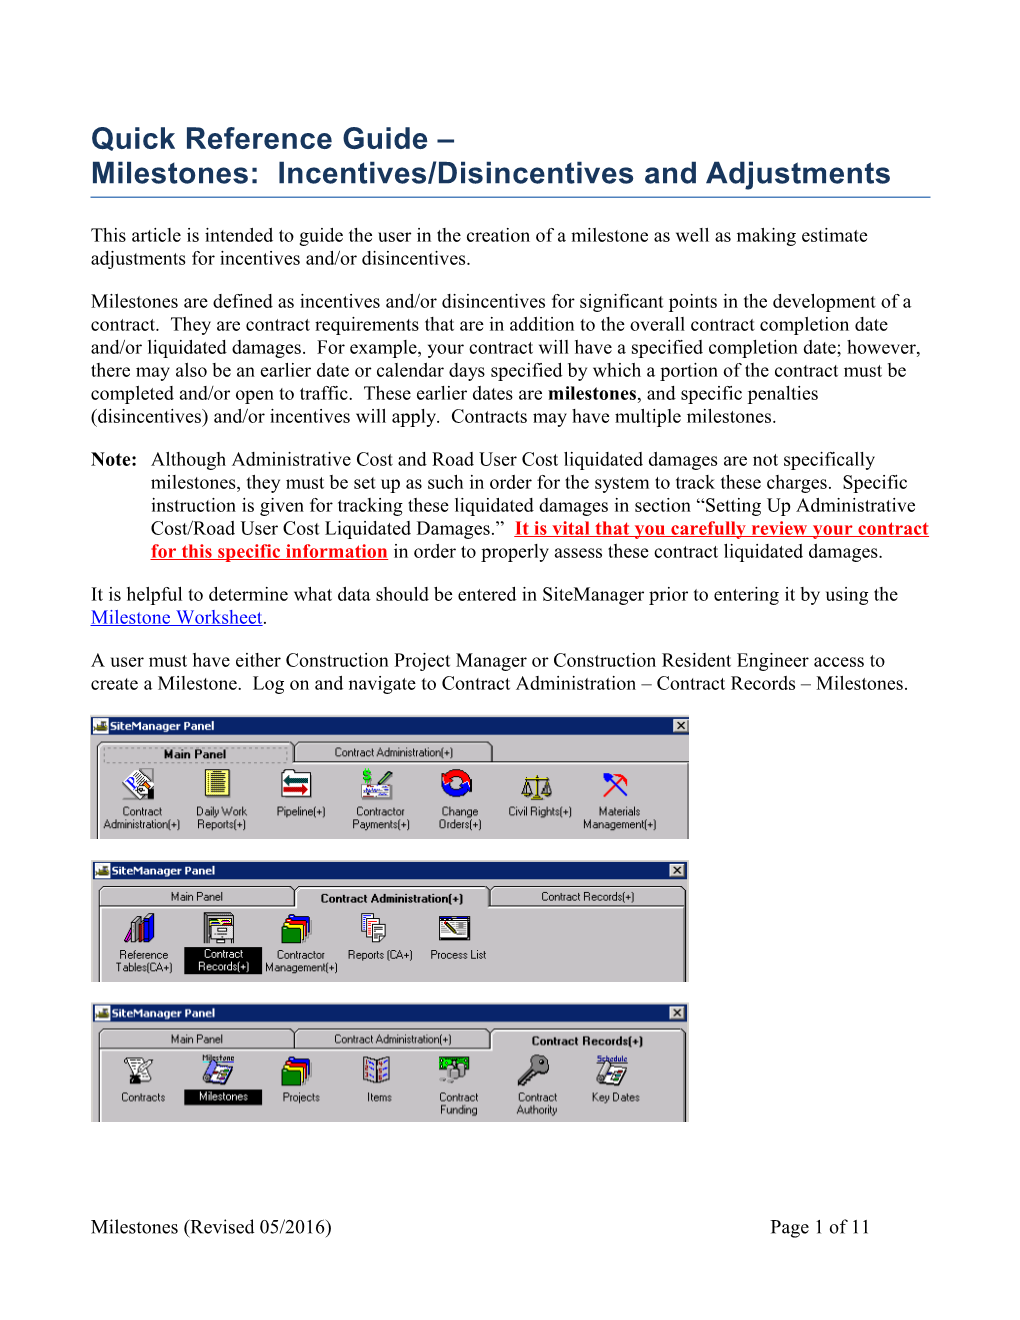 Quick Reference Guide Milestones: Incentives/Disincentives and Adjustments